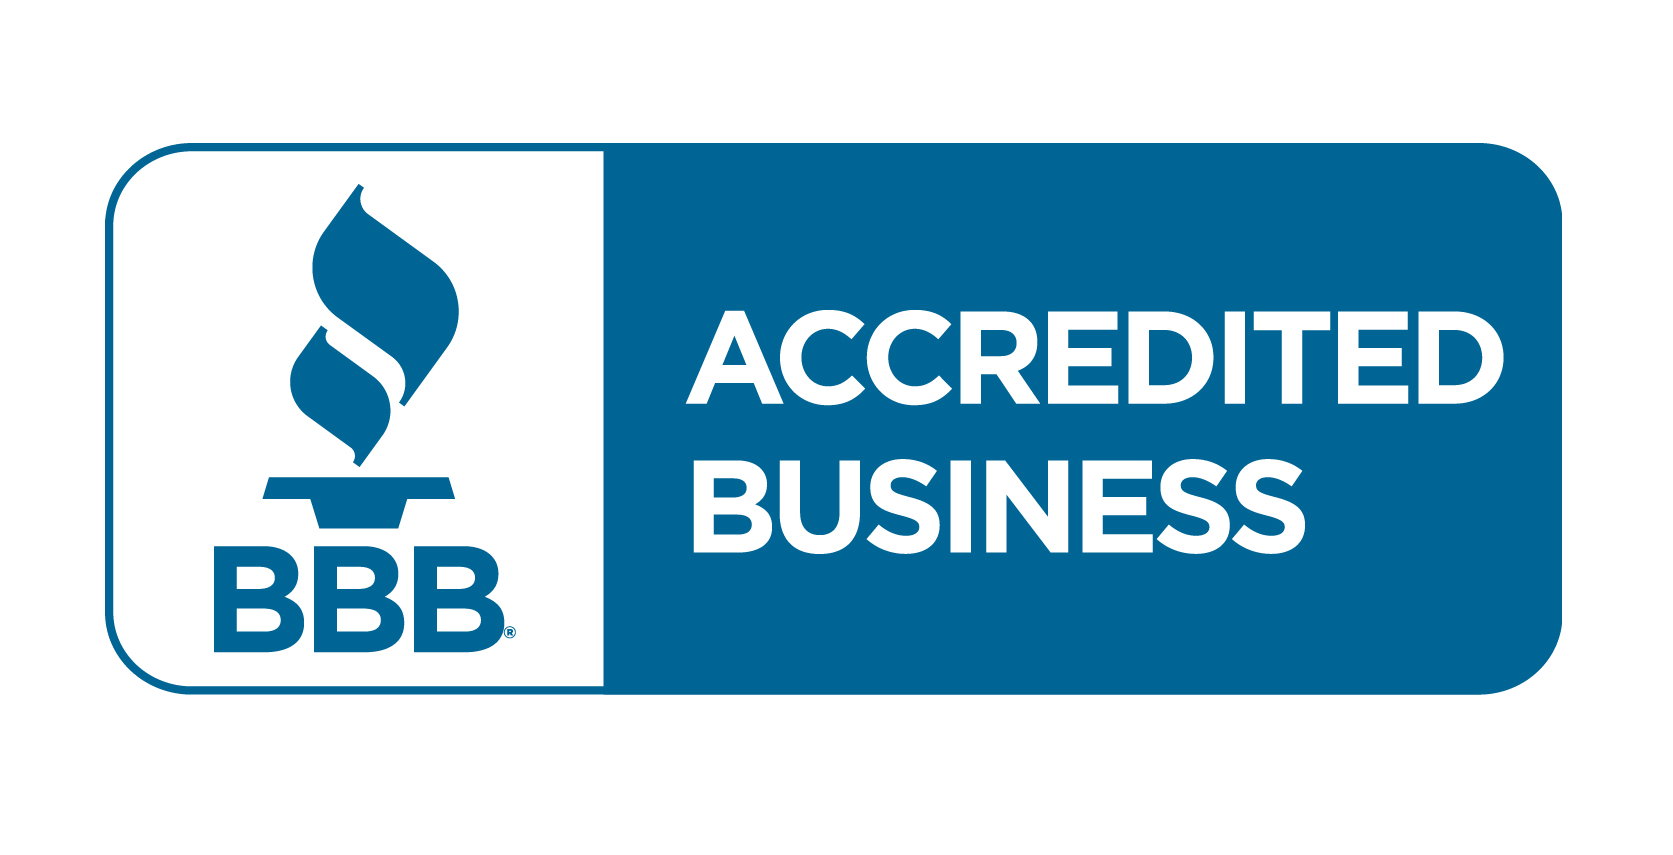 Townsend Arborcare is very proud to be an accredited company by the Better Business Bureau for our services.